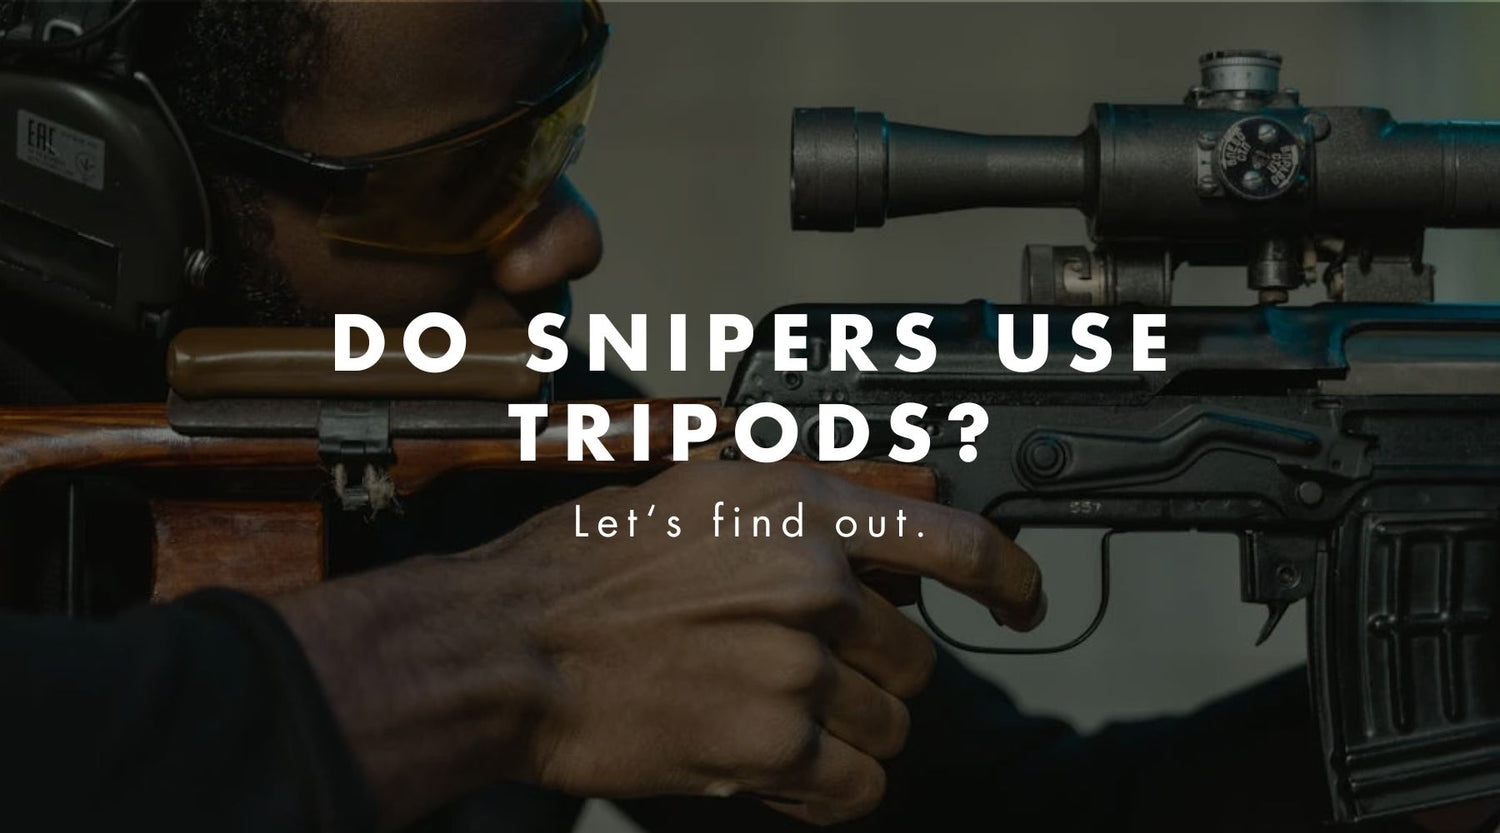 Do snipers use tripods?